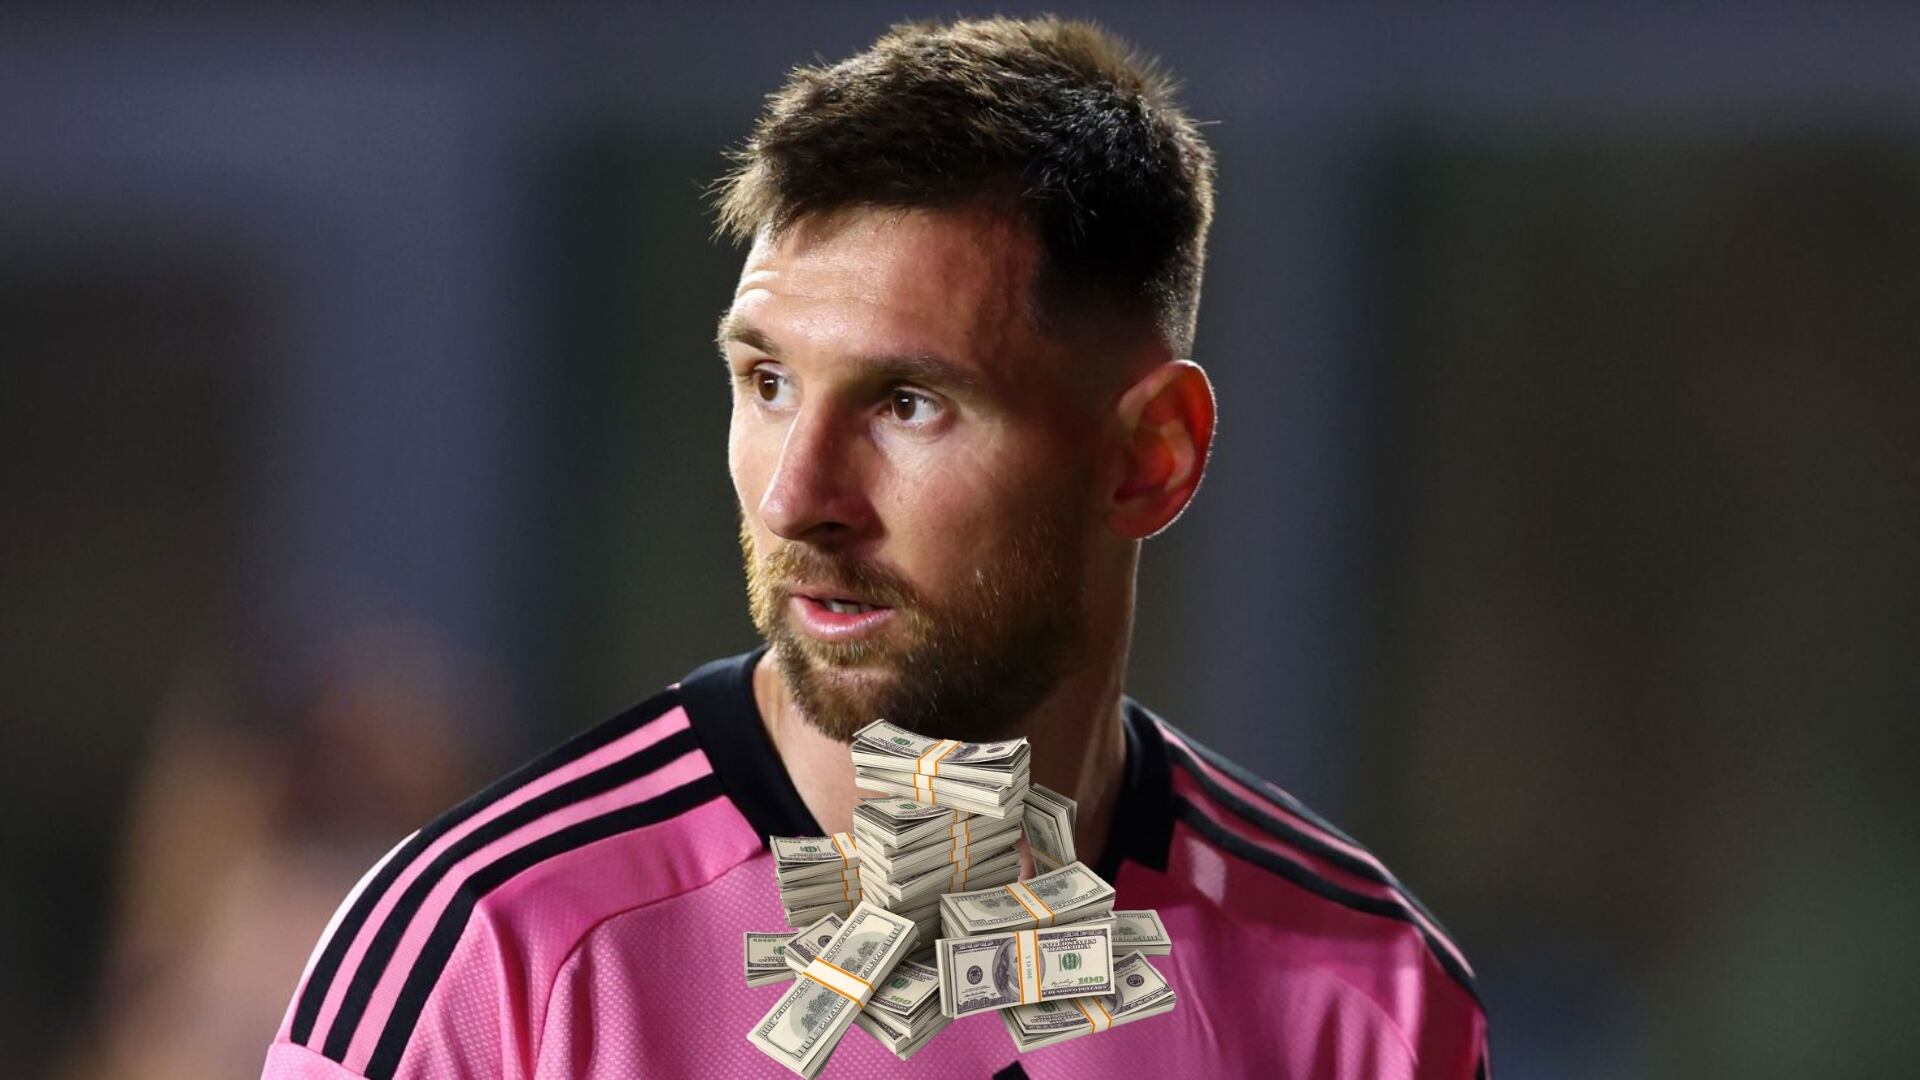 Messi's new investment that costed $50M and all his fans around the world will want to experience